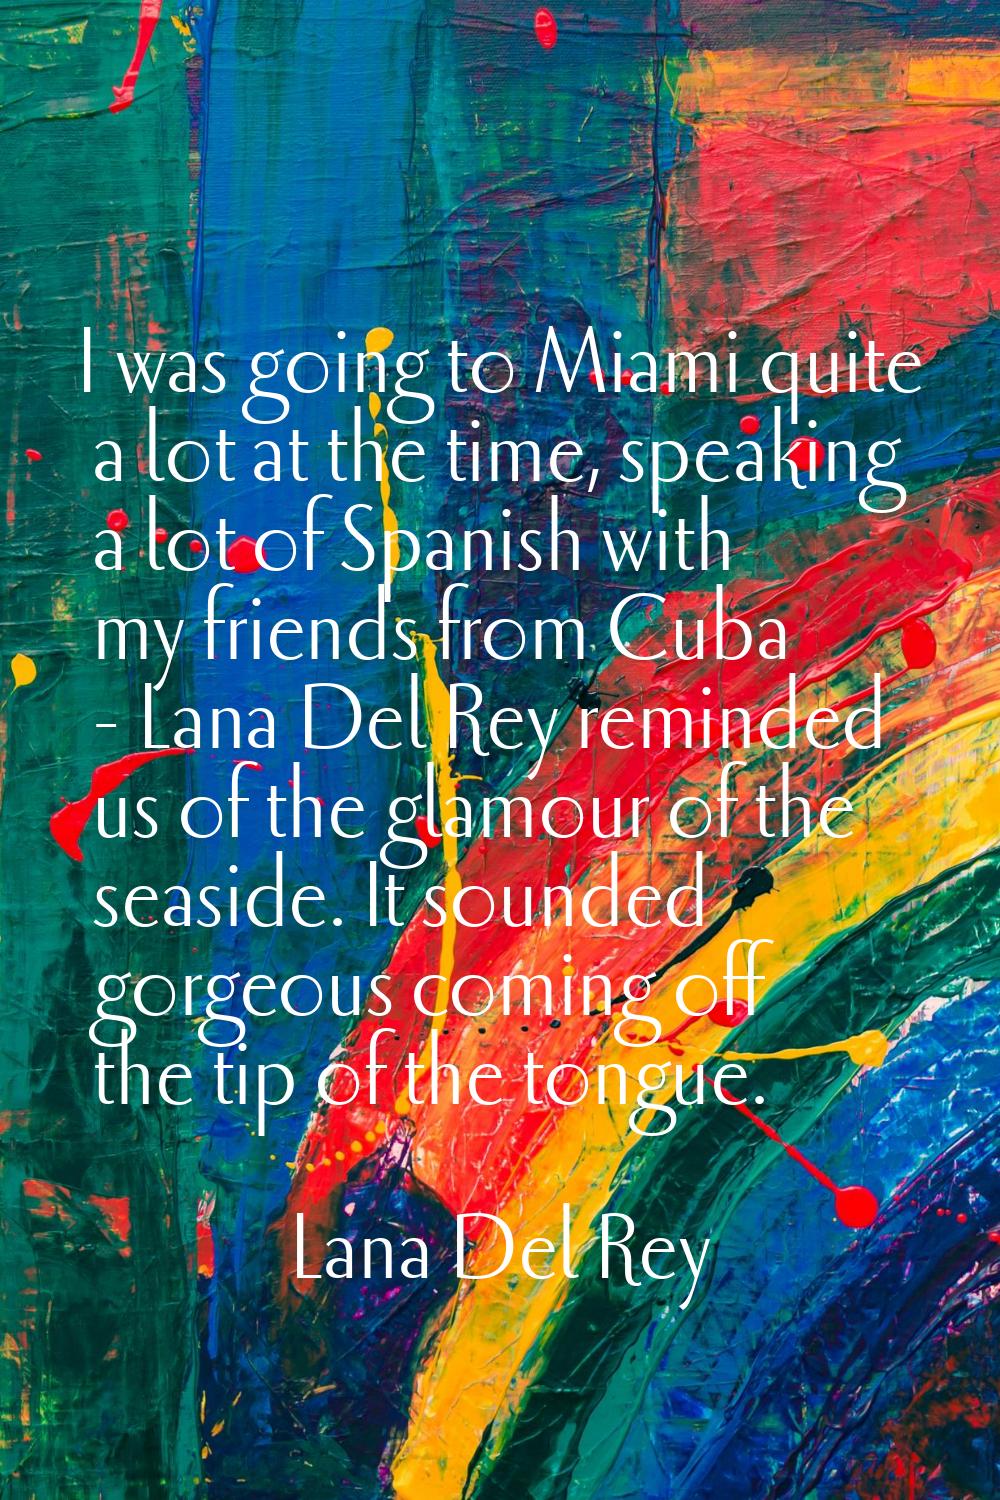 I was going to Miami quite a lot at the time, speaking a lot of Spanish with my friends from Cuba -